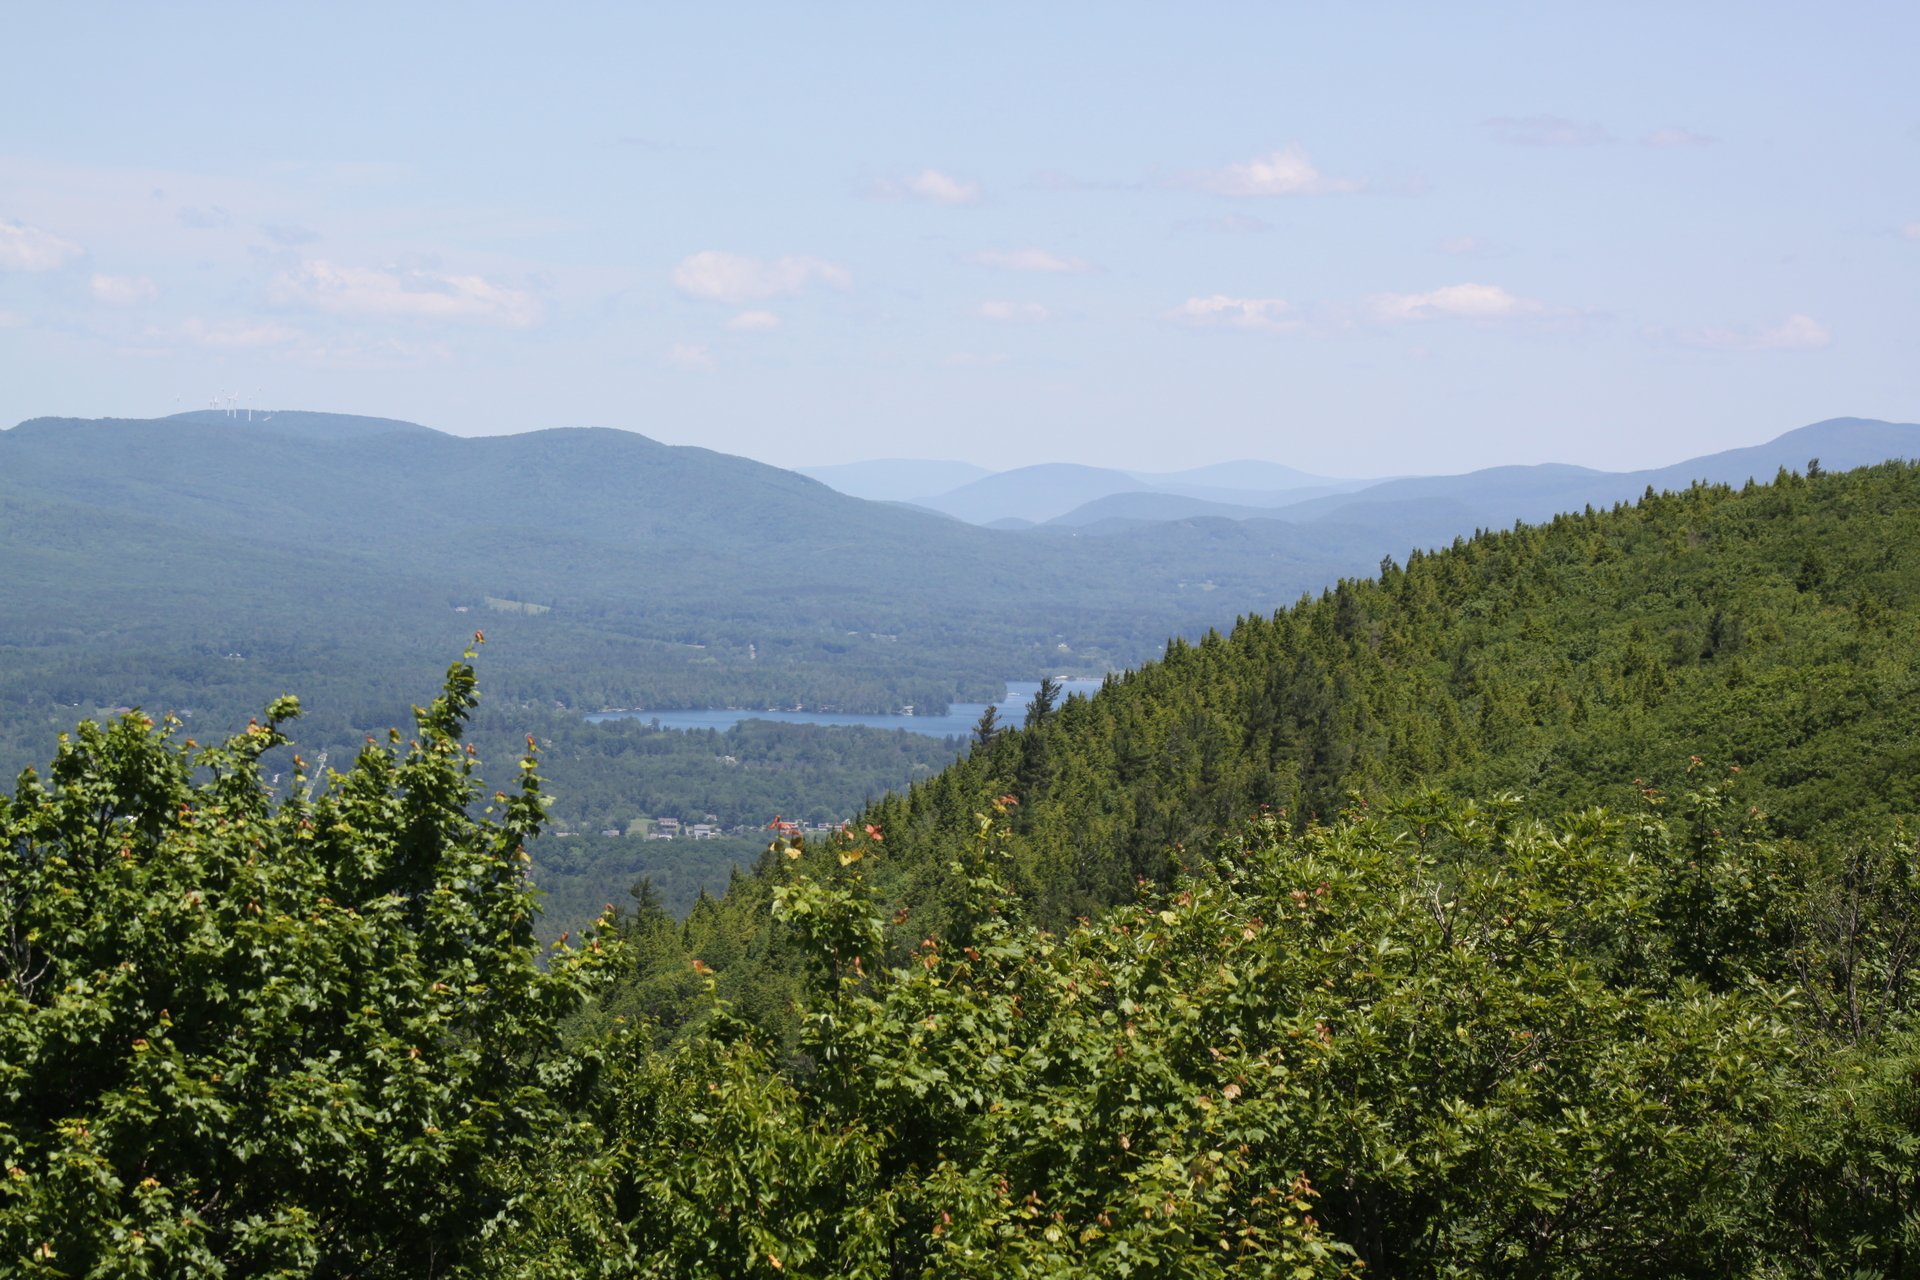 Atop a green grassy hill overlooking a forest with water below. Mountains off in the distance.